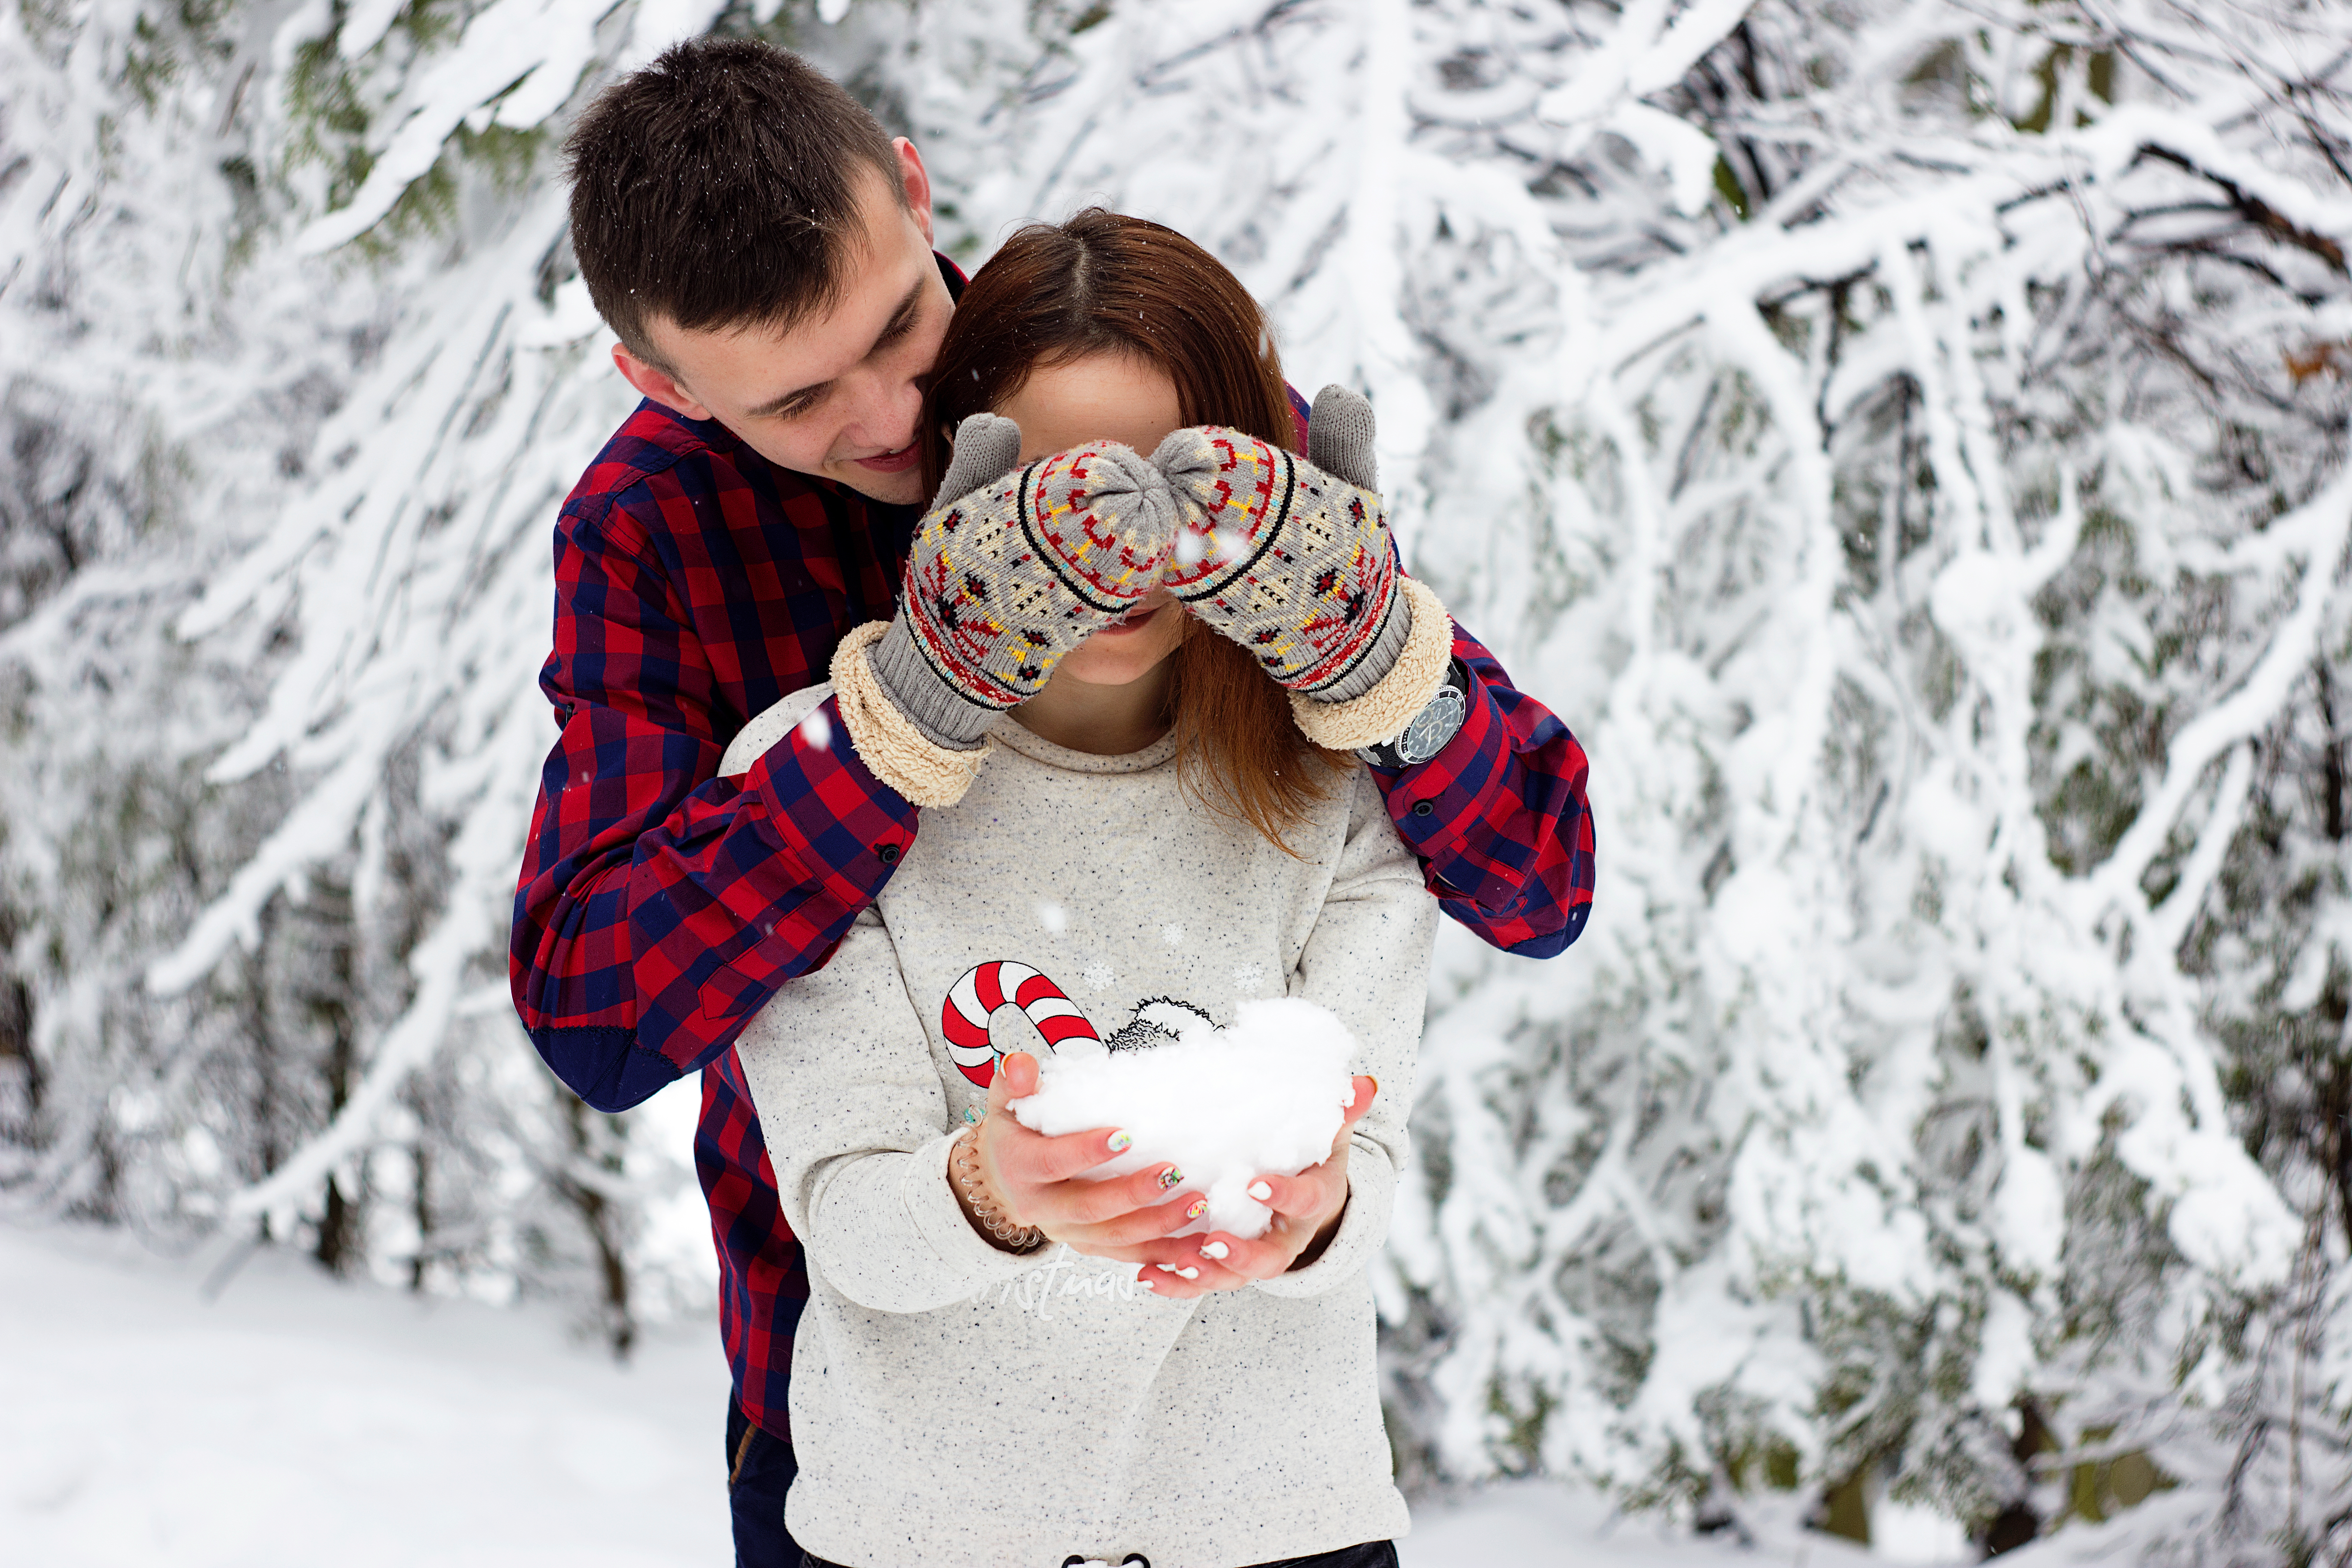 A couple in love playing snowballs